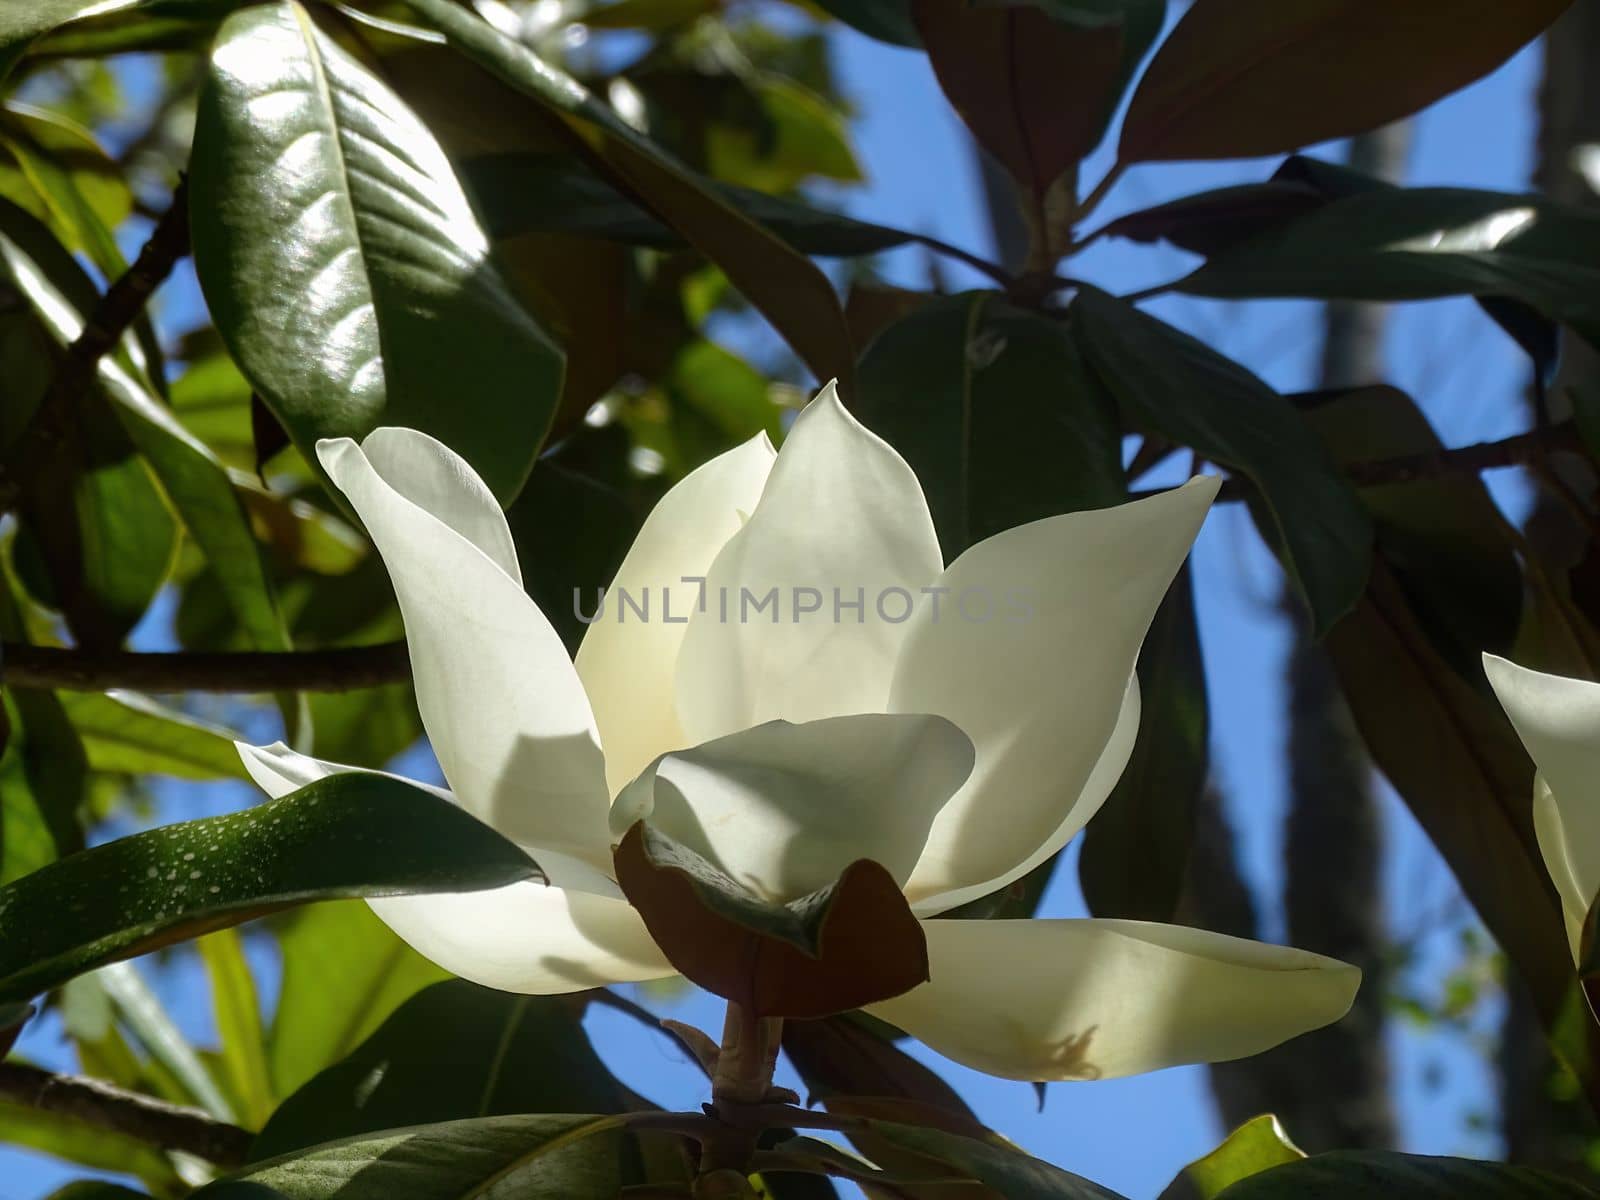 A huge white magnolia flower on a branch by Challlenger